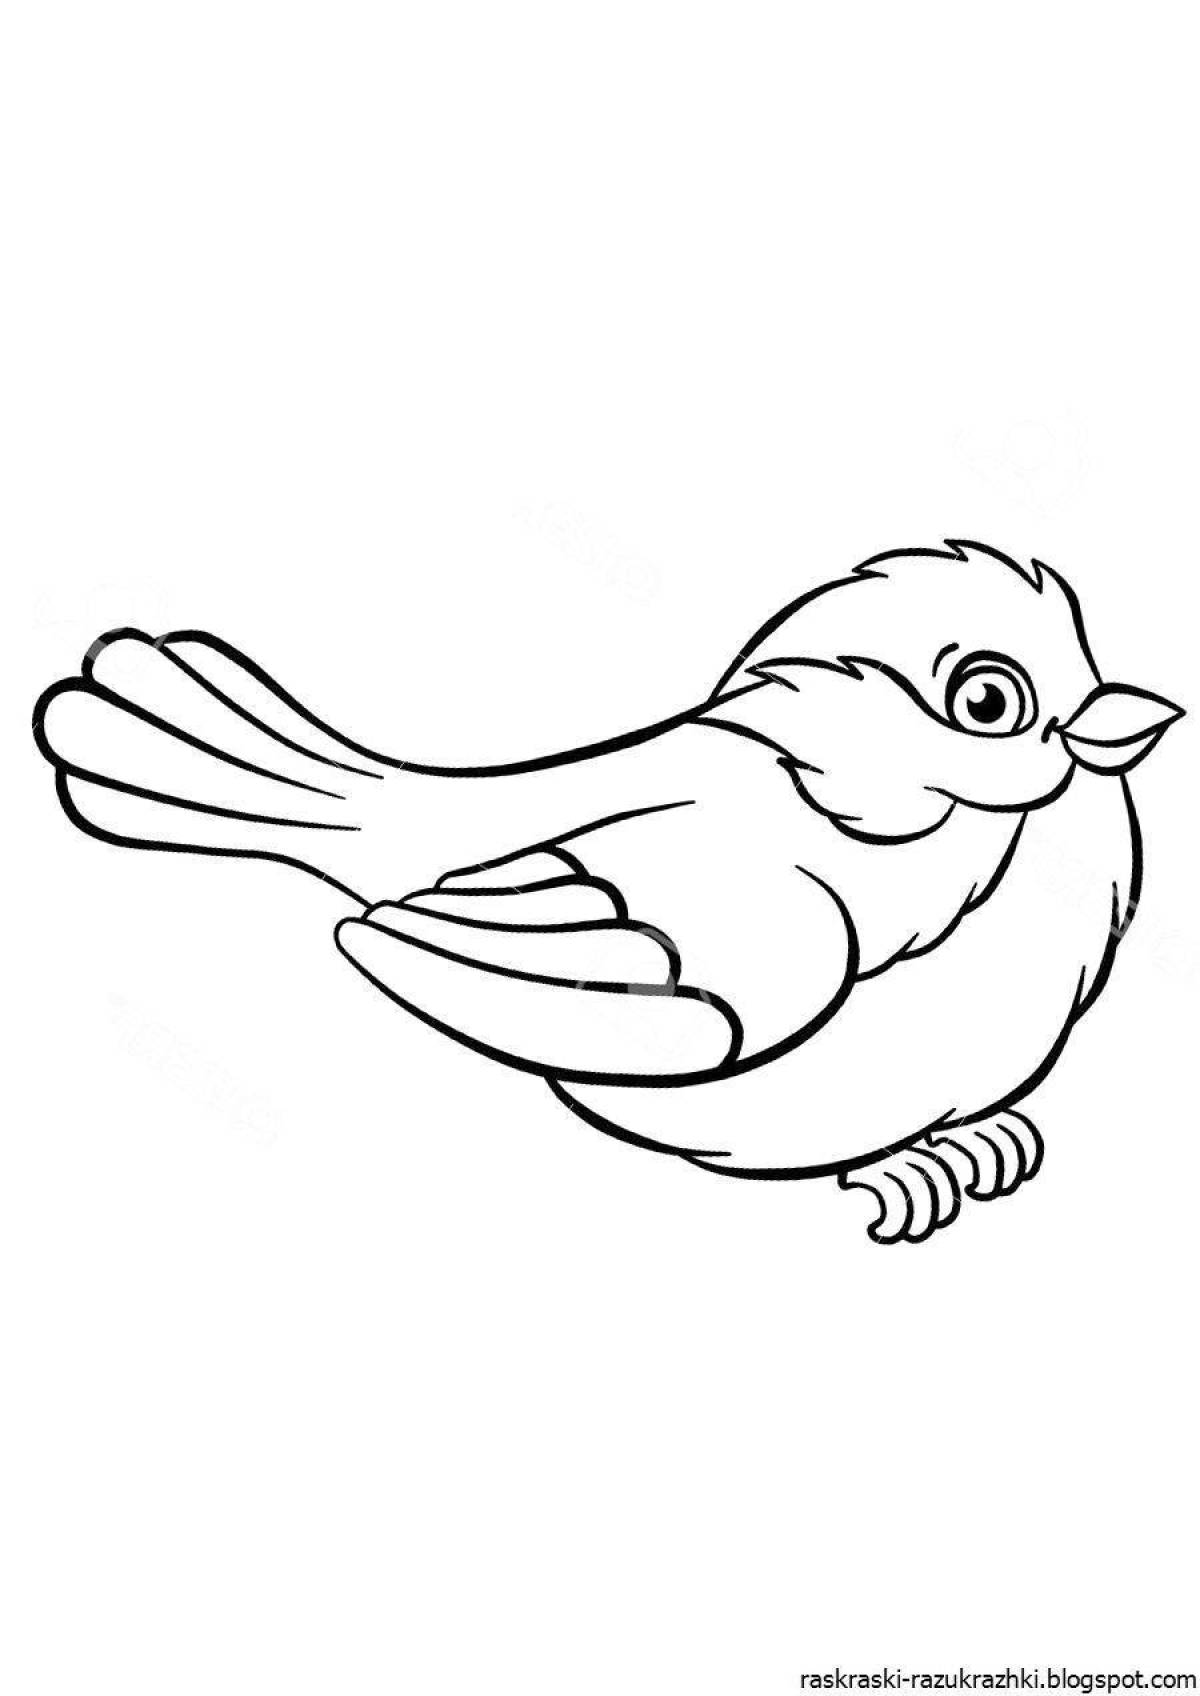 Coloring animated sparrow